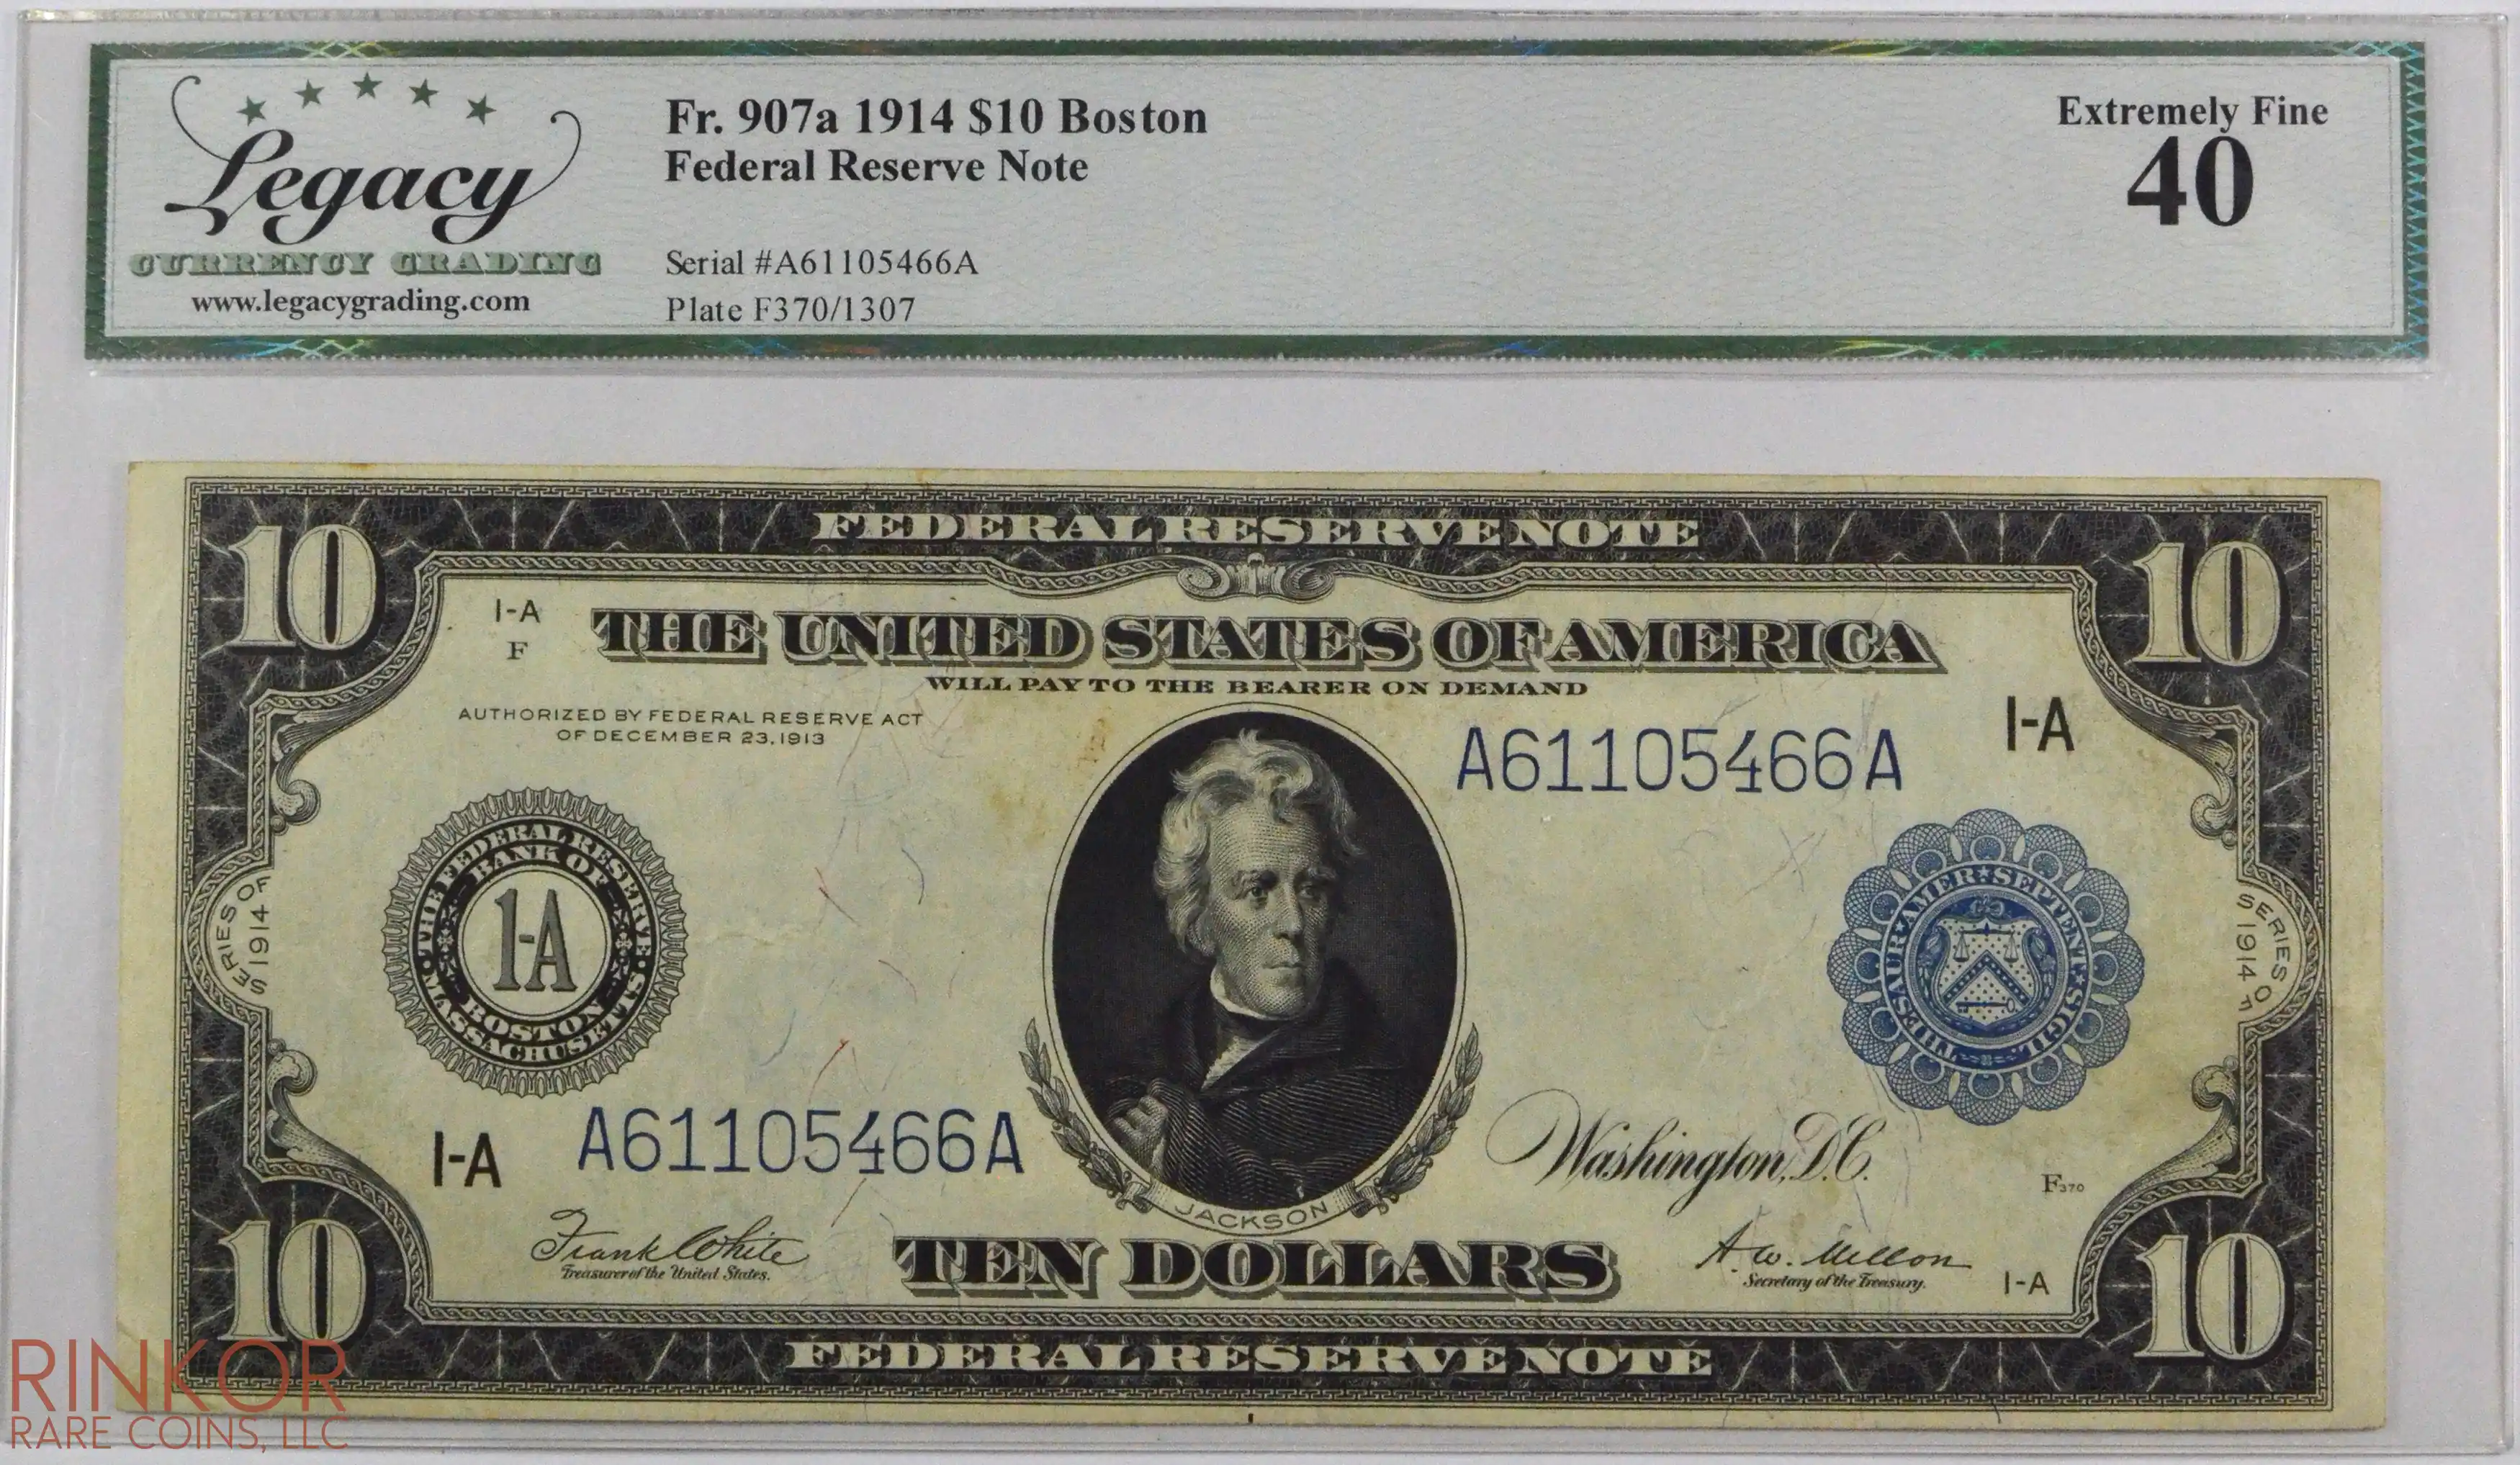 1914 $10 Fr. 907a Boston Federal Reserve Note LCG XF-40